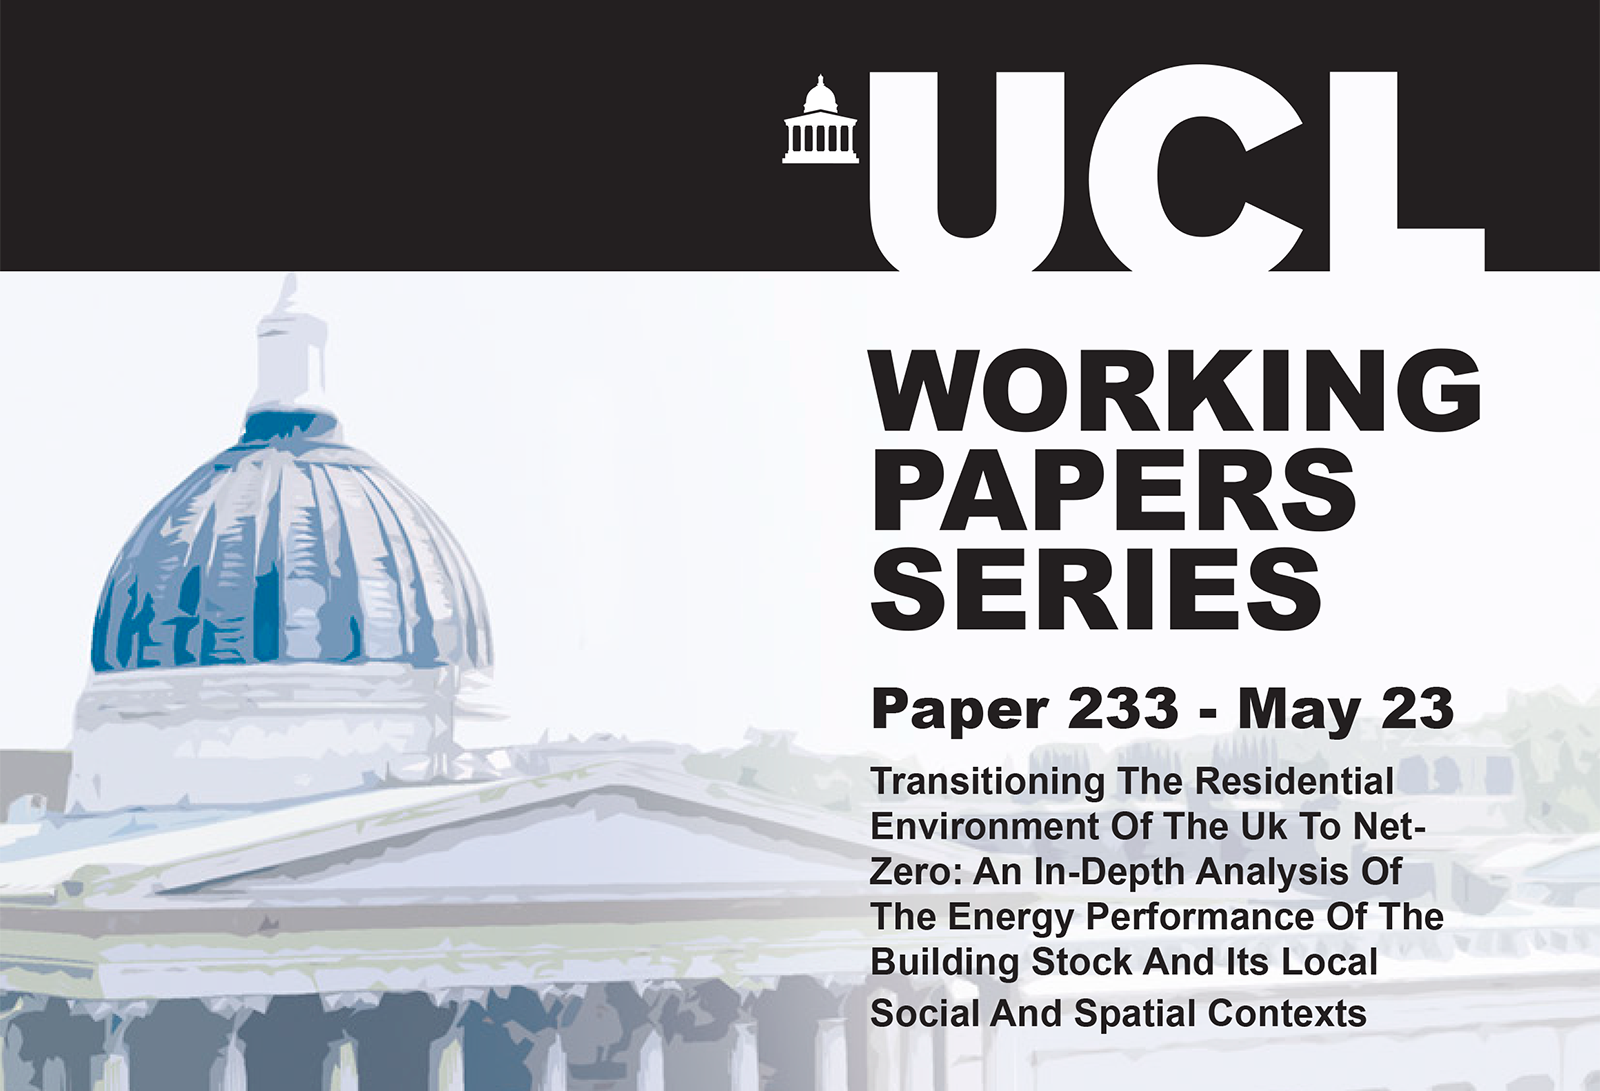 WORKING PAPERS SERIES; Paper 233 - May 23; Transitioning The Residential Environment Of The Uk To Net-Zero: An In-Depth Analysis Of The Energy Performance Of The Building Stock And Its Local Social And Spatial Contexts